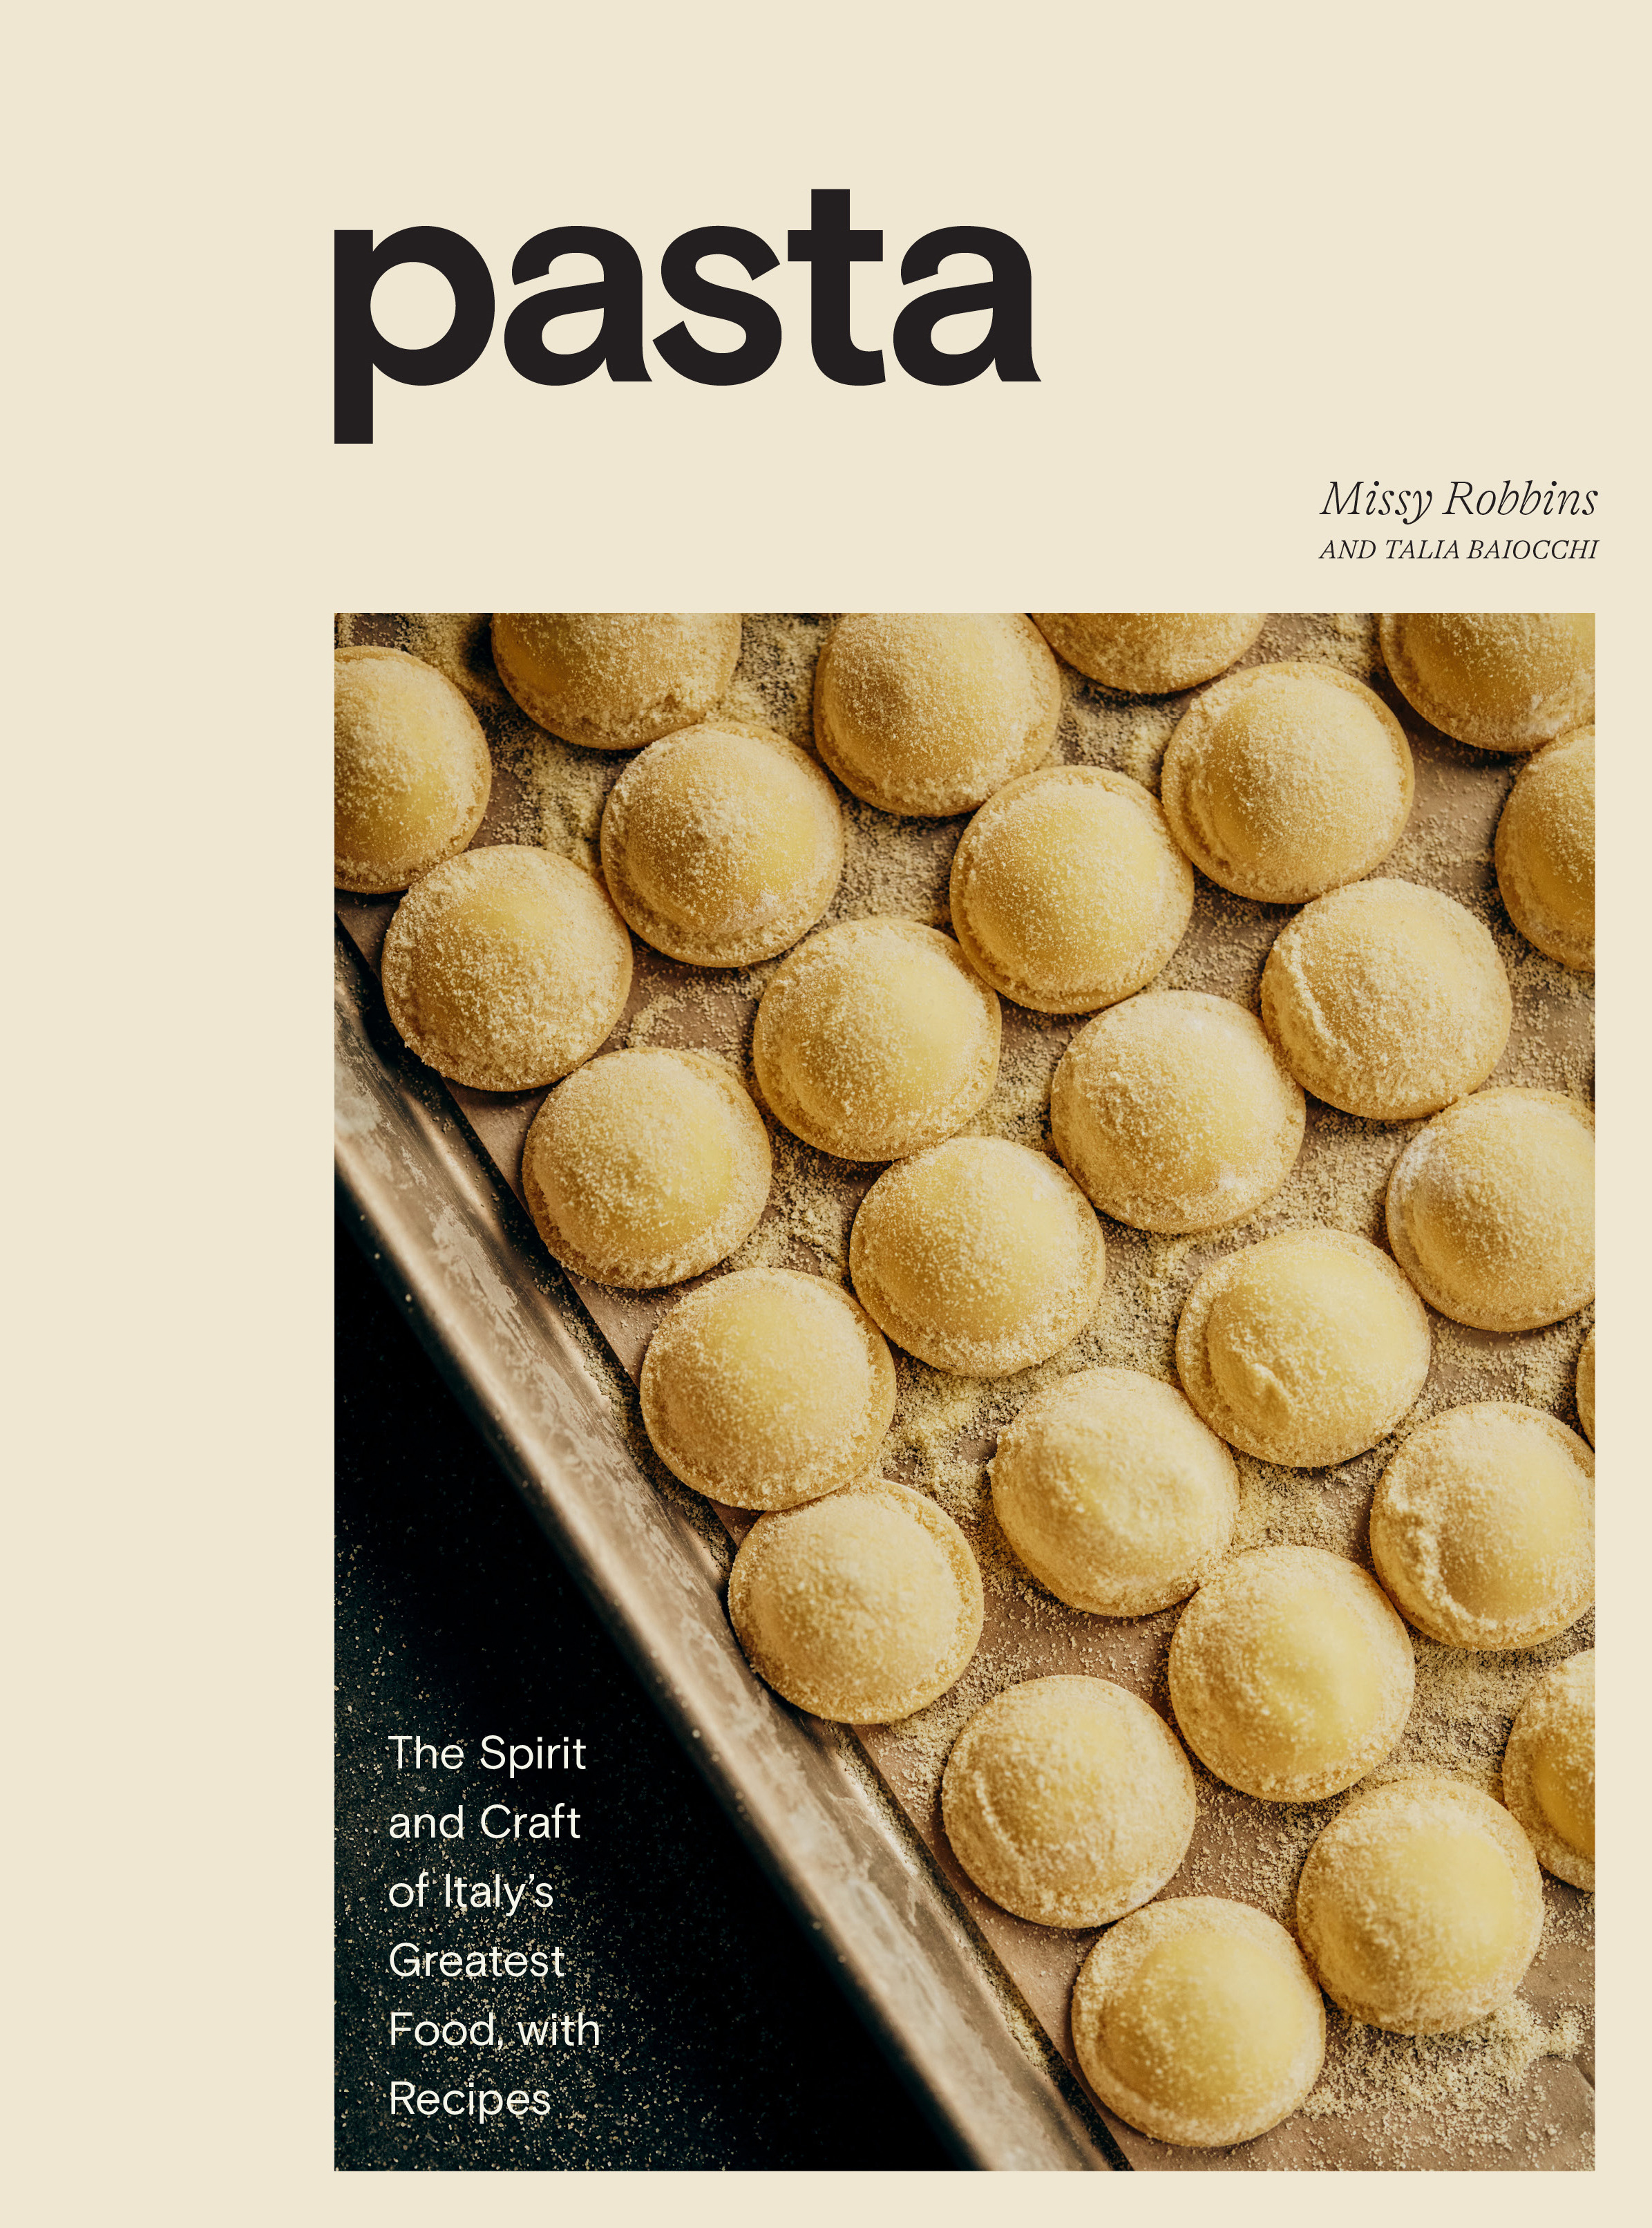 “Pasta: The Spirit and Craft of Italy’s Greatest Food,” by Missy Robbins and Talia Baiocchi.